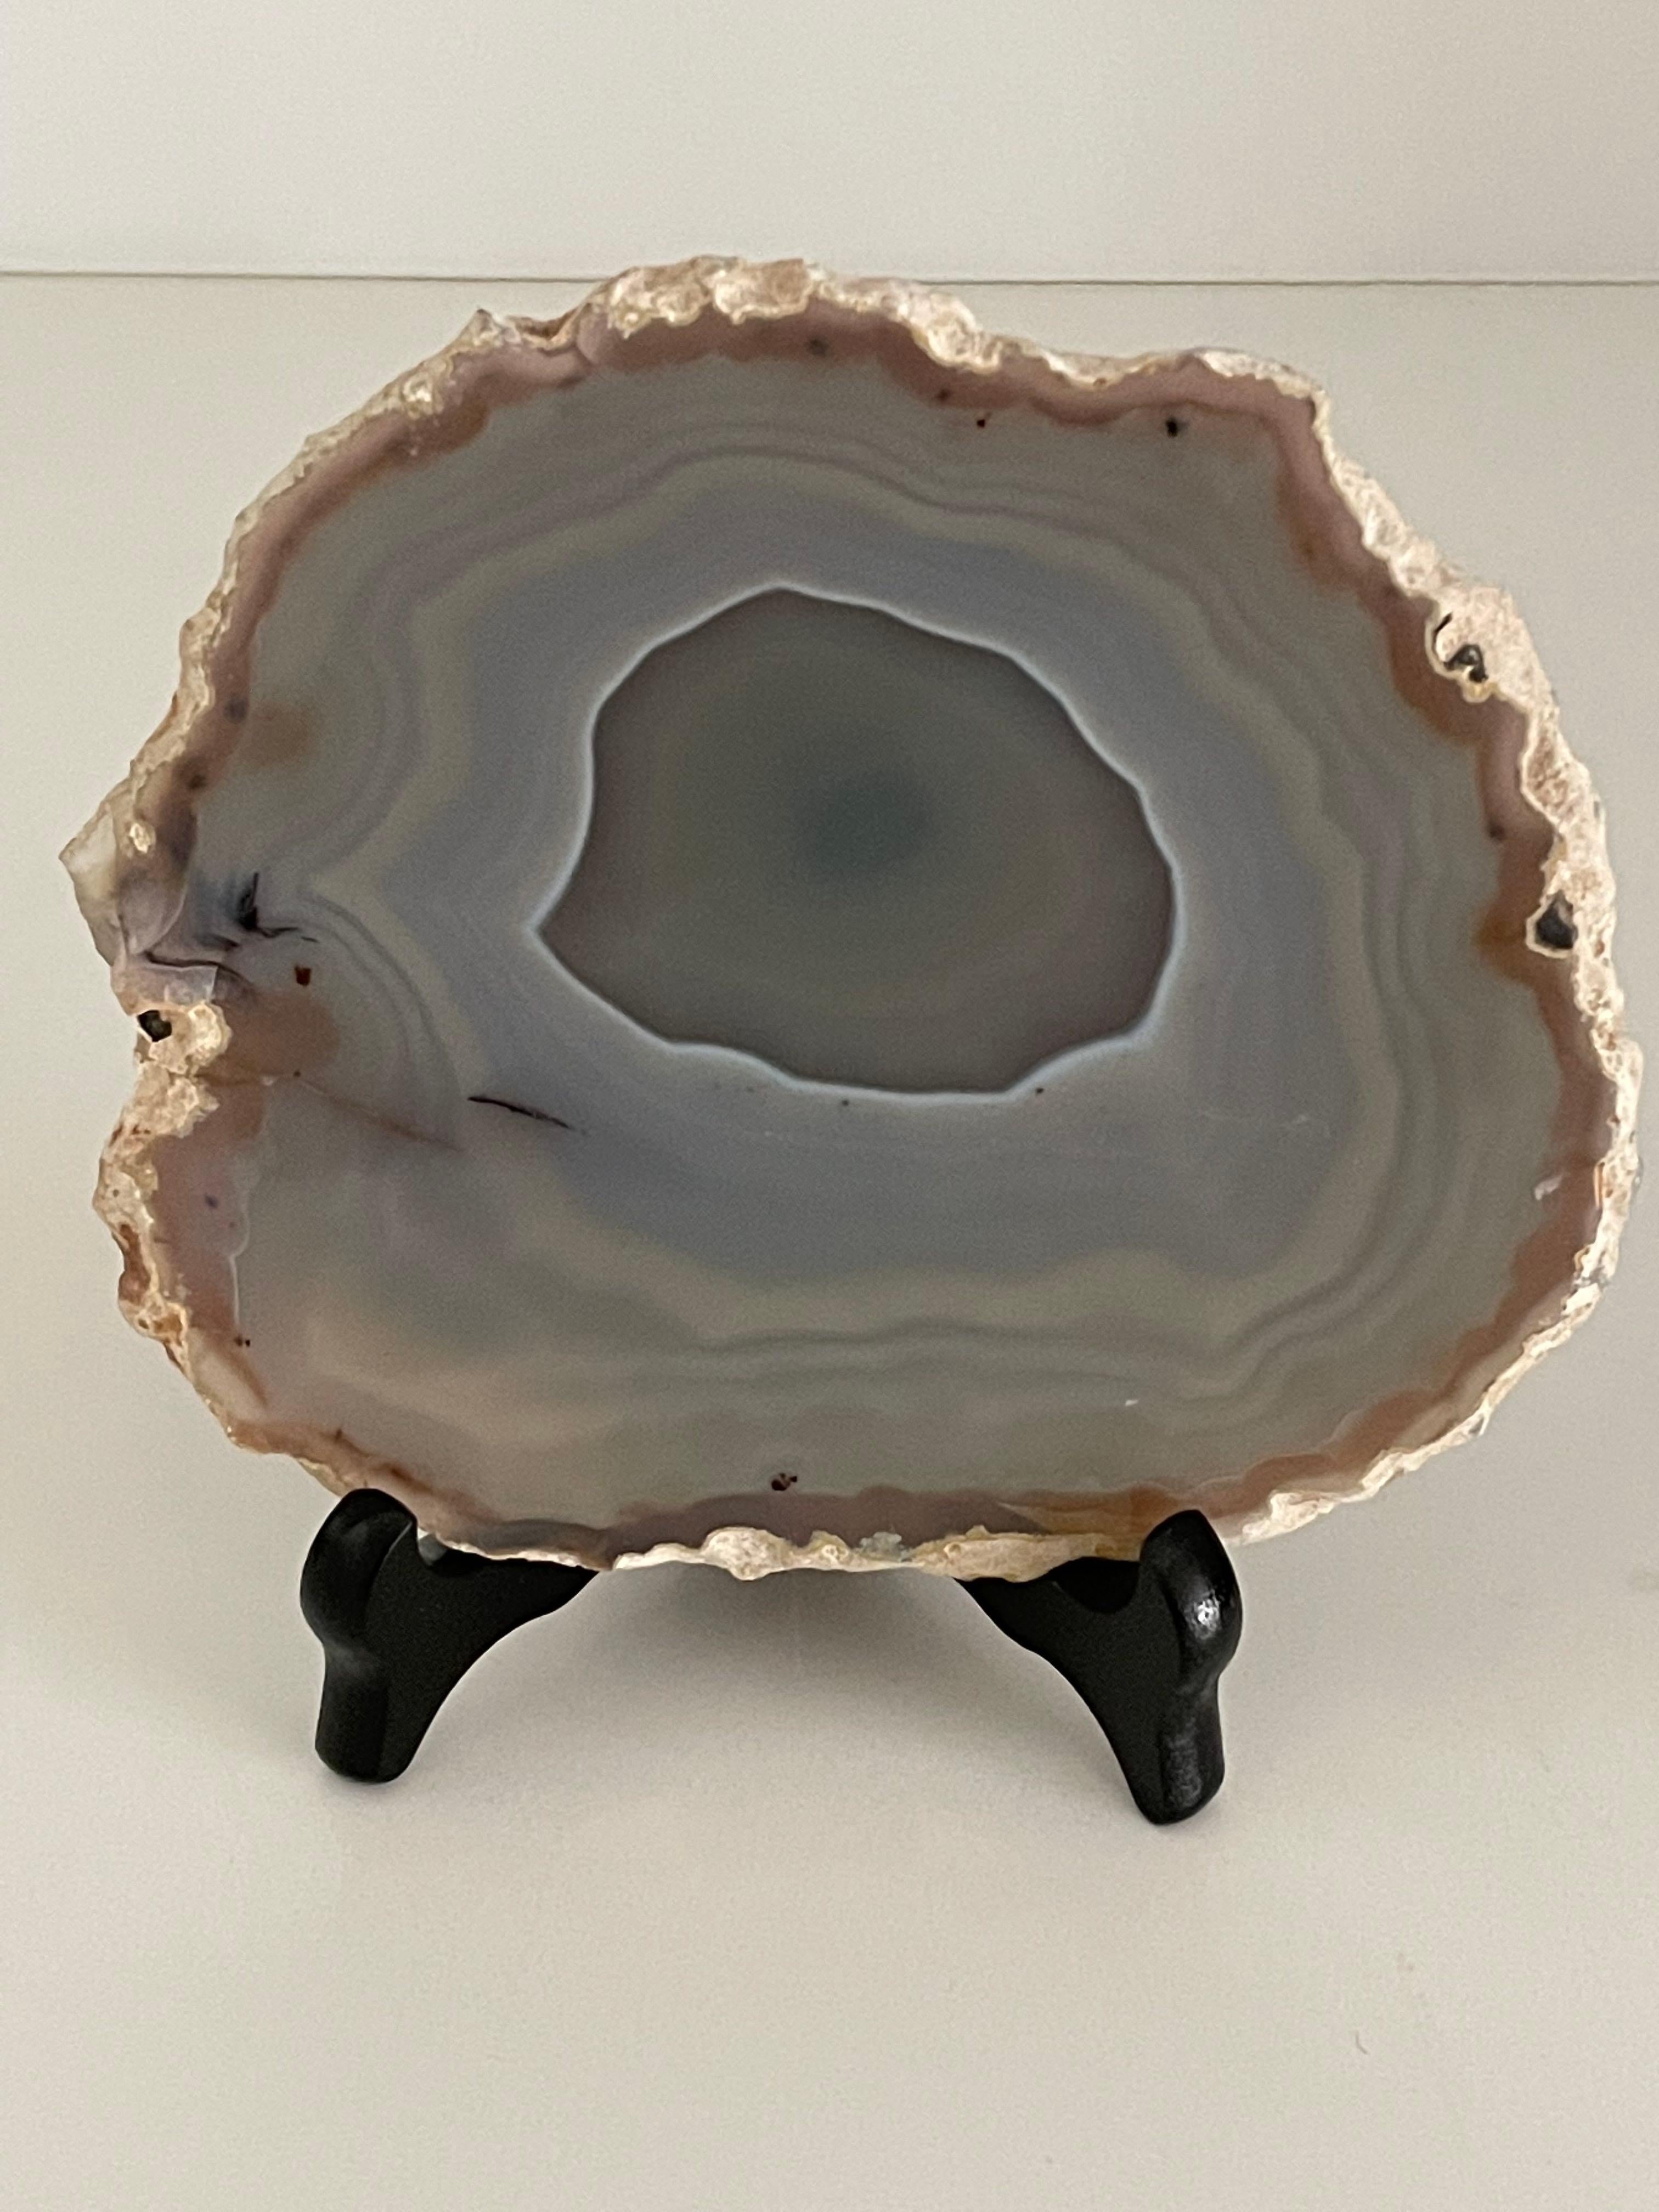 Brazilian thin slice of agate mounted on a wood stand.
Agate is a banded form of finely-grained, microcrystalline Quartz. 
The lovely color patterns and banding make this translucent gemstone very unique. 
Agates can have many distinctive styles